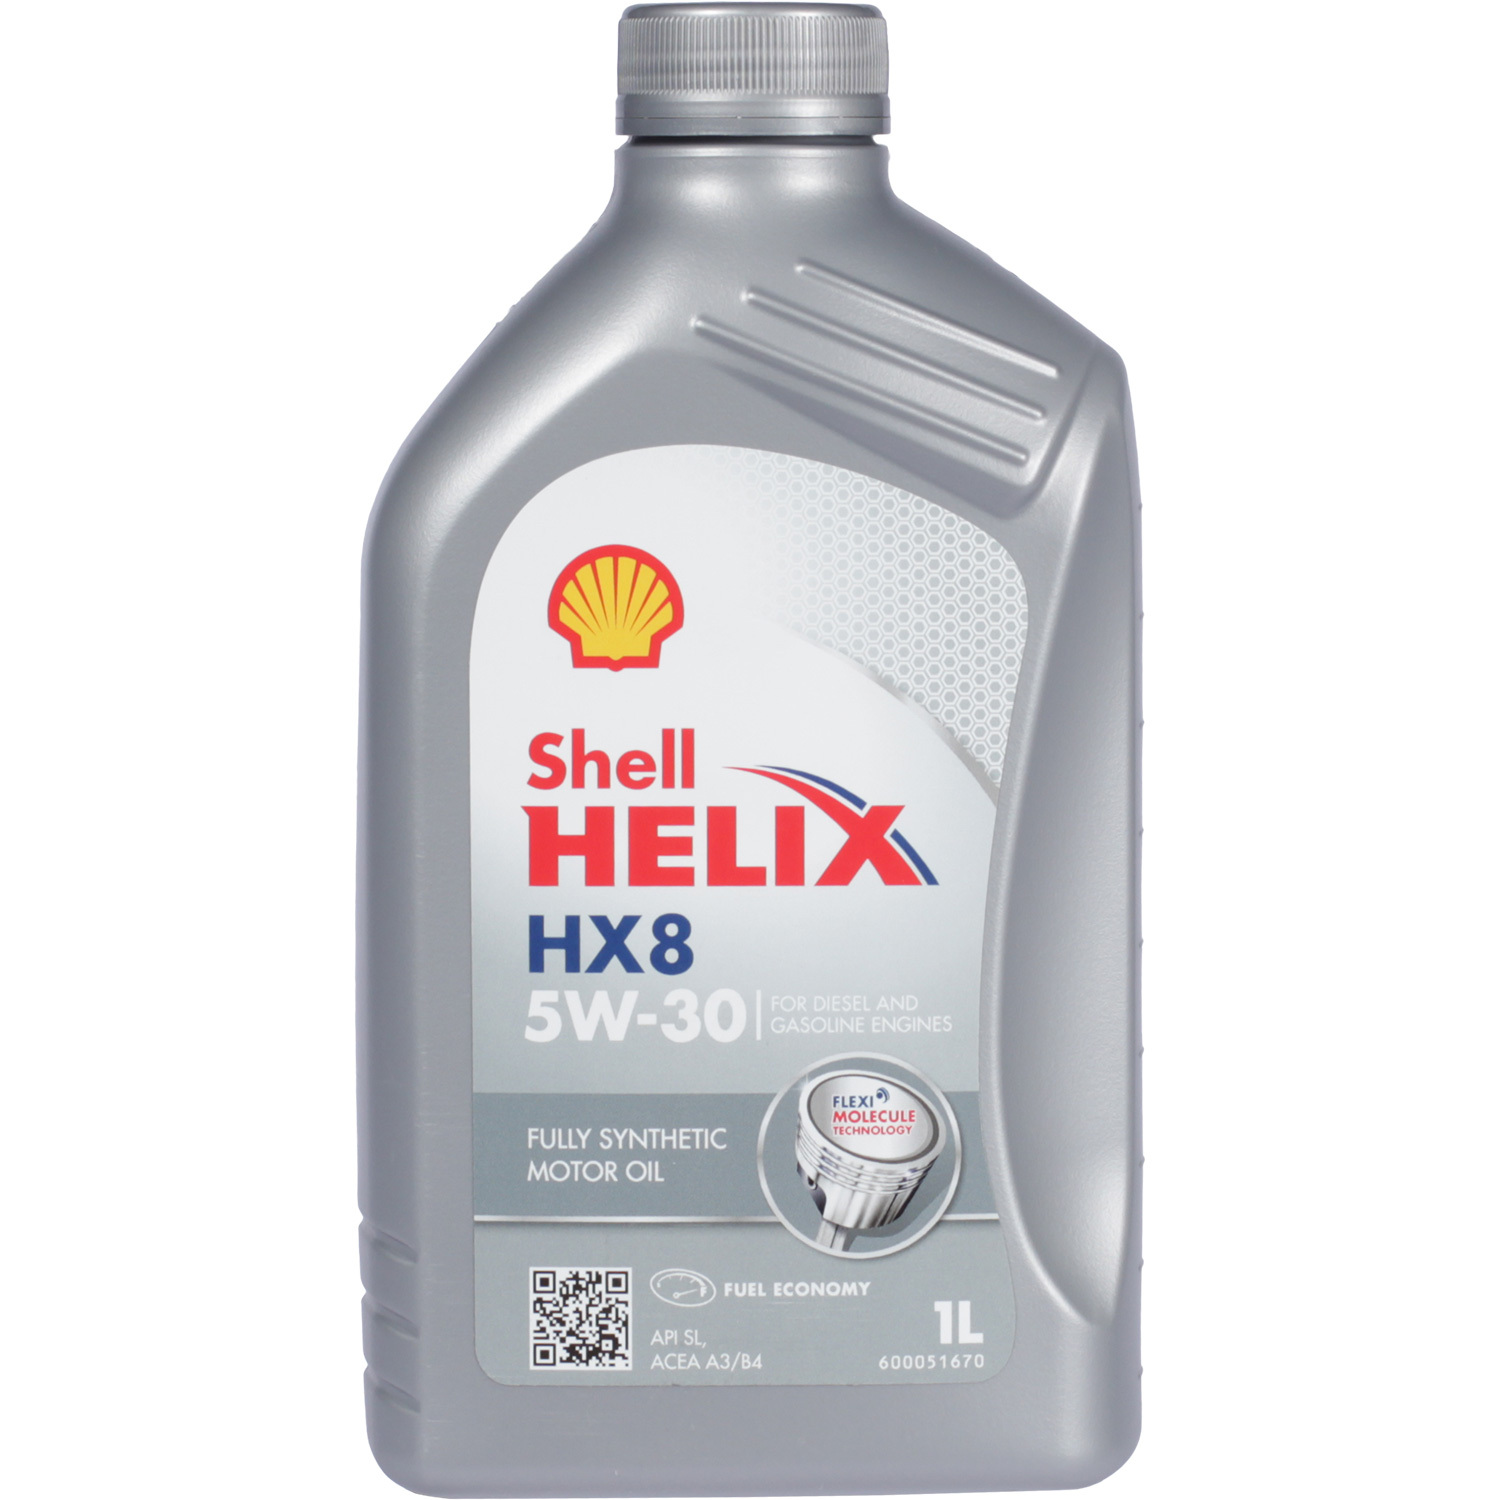 Shell Моторное масло Shell Helix HX8 5W-30, 1 л